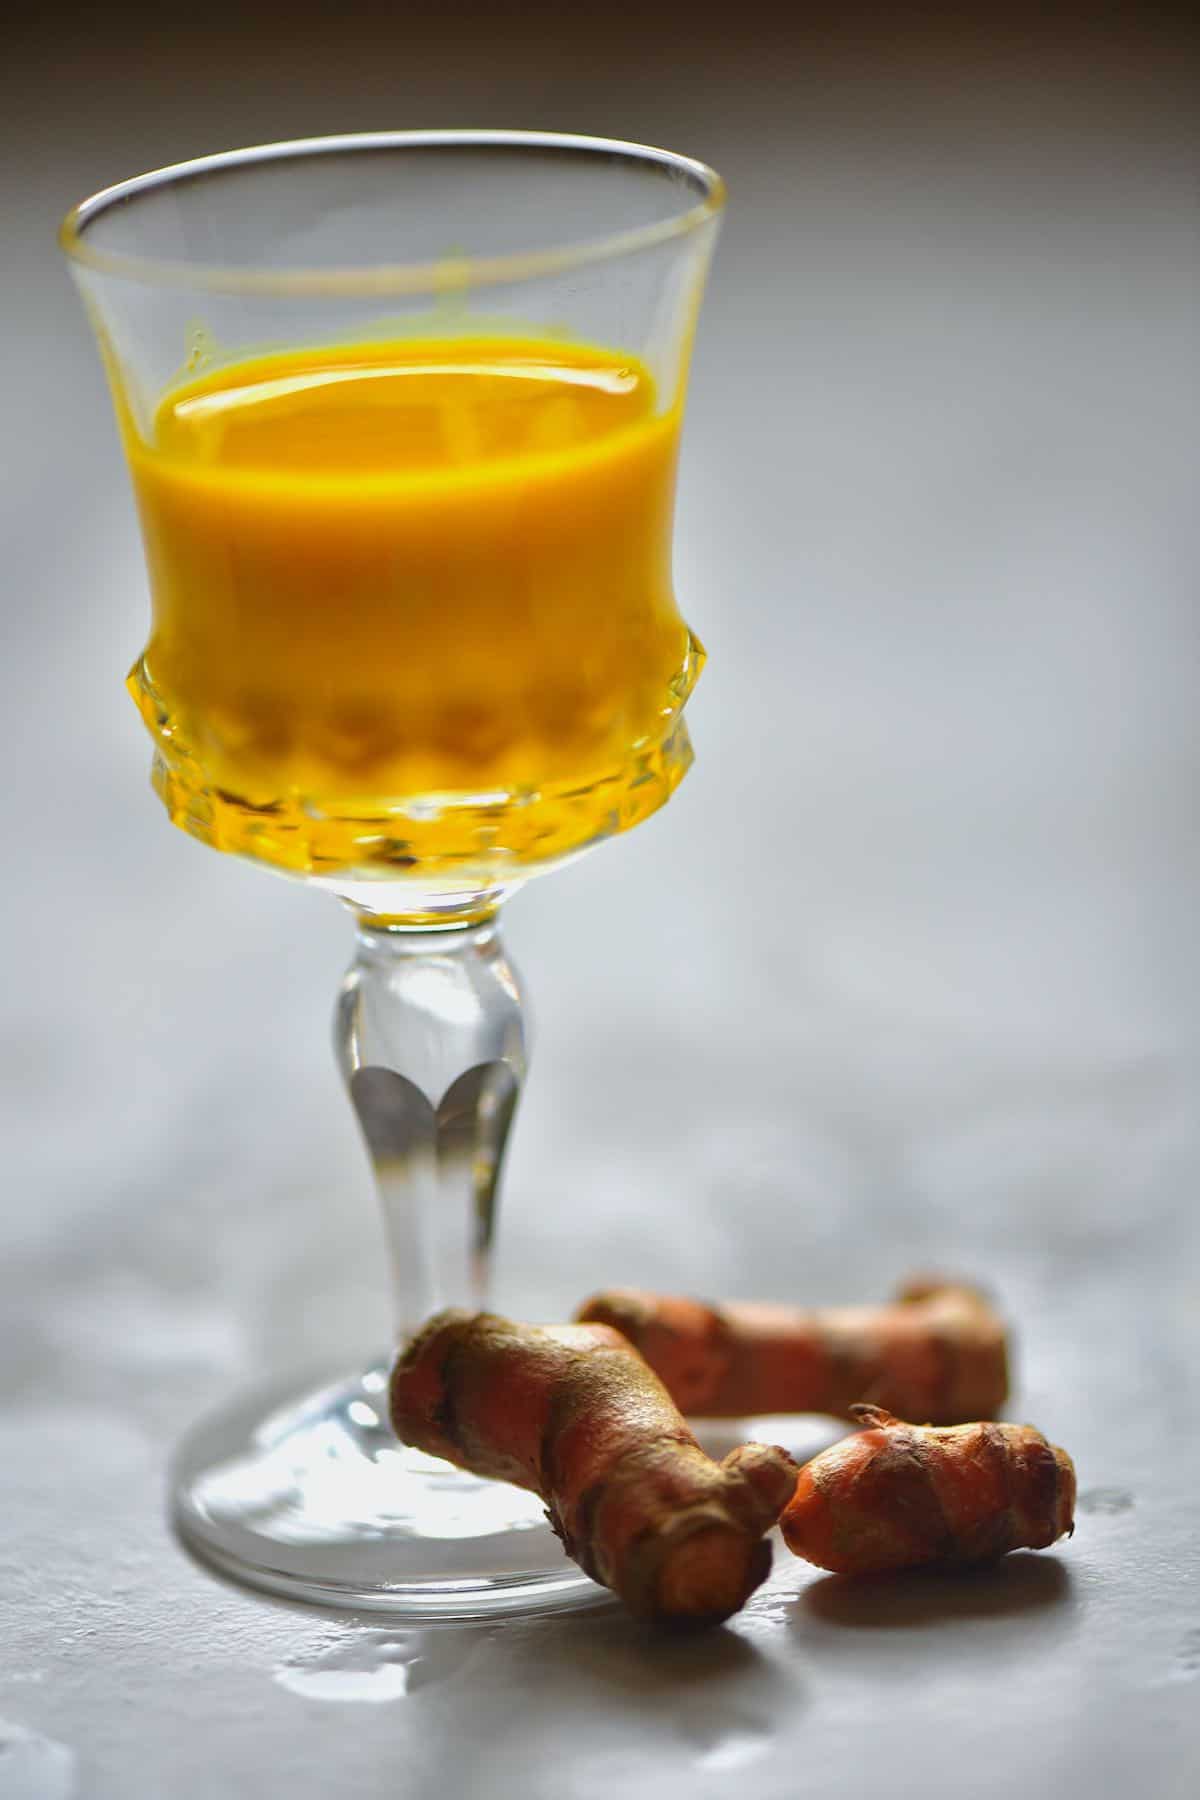 A small glass with turmeric juice and turmeric next to it